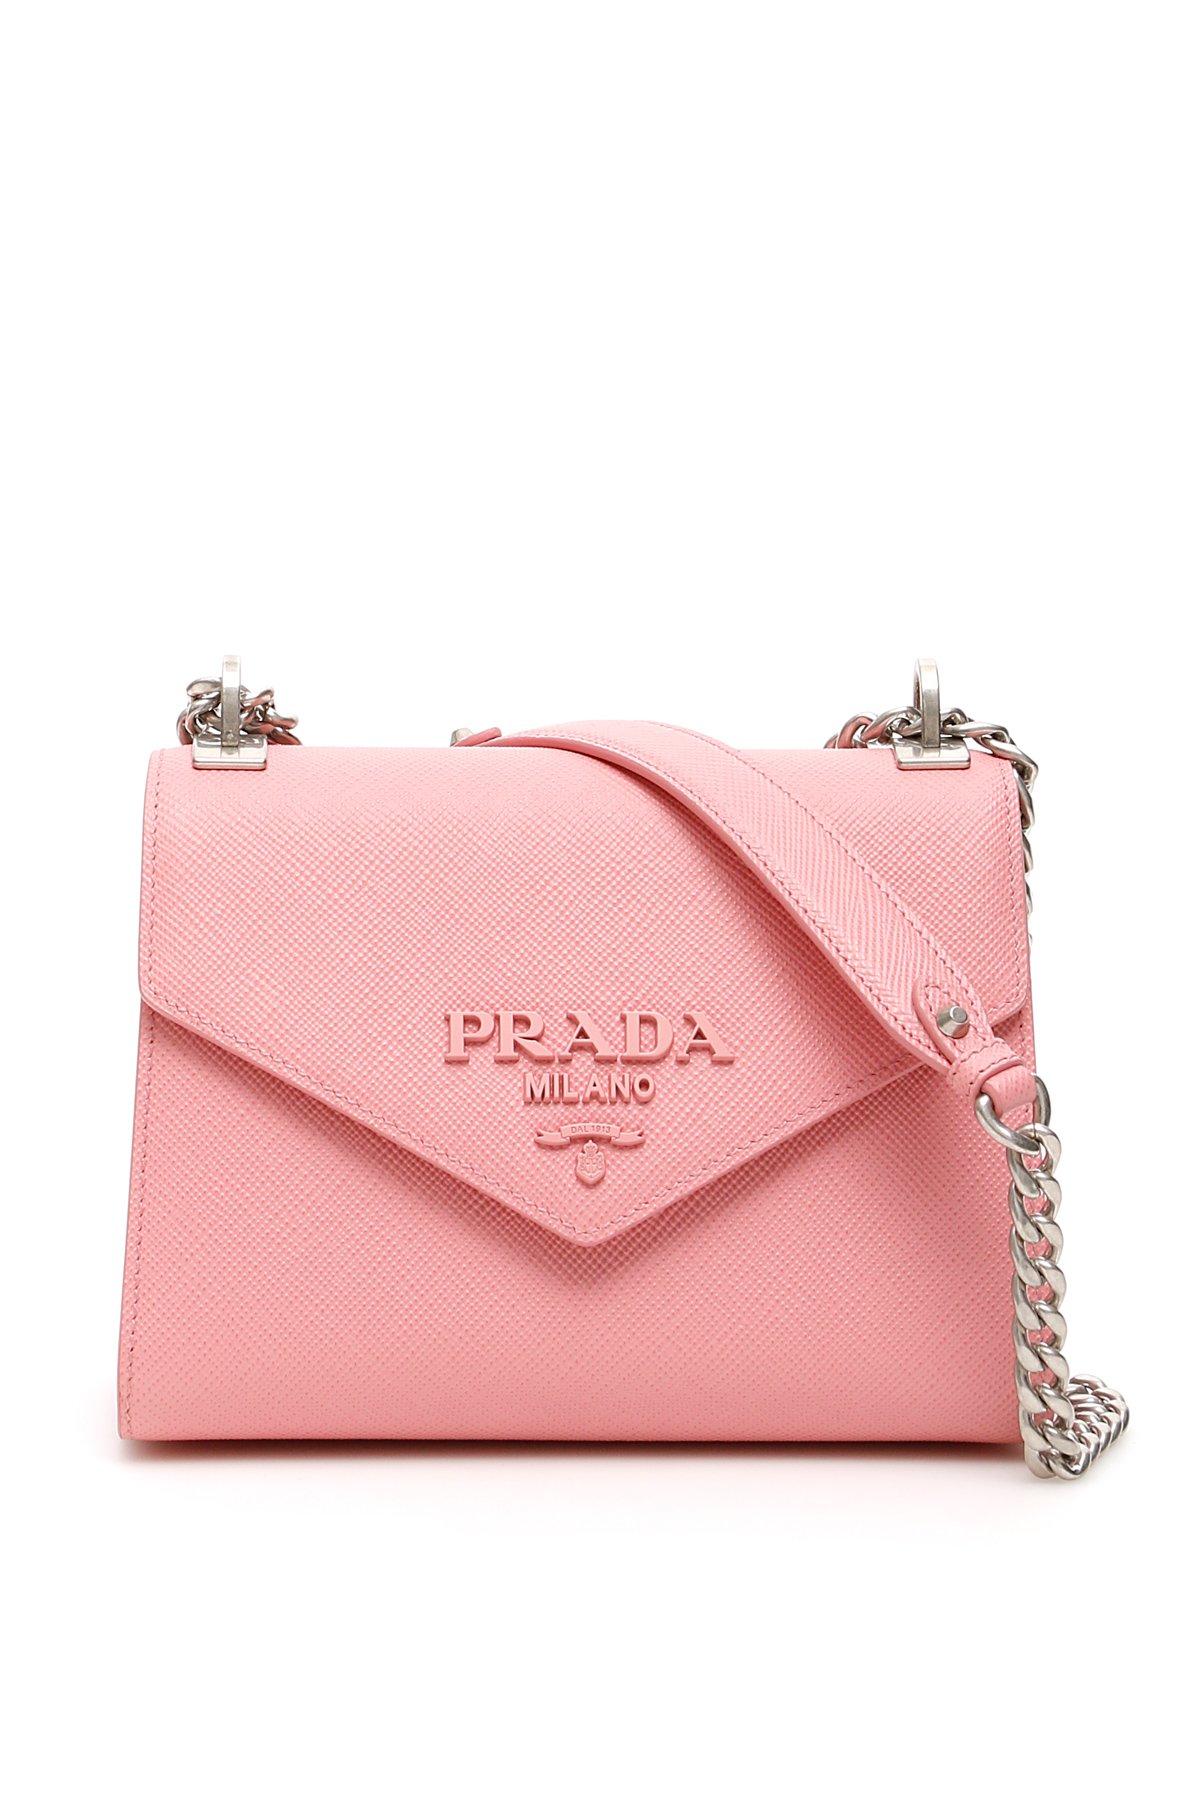 Shop 5 Pink Totes Inspired By Chrishell Stause's Prada Bag